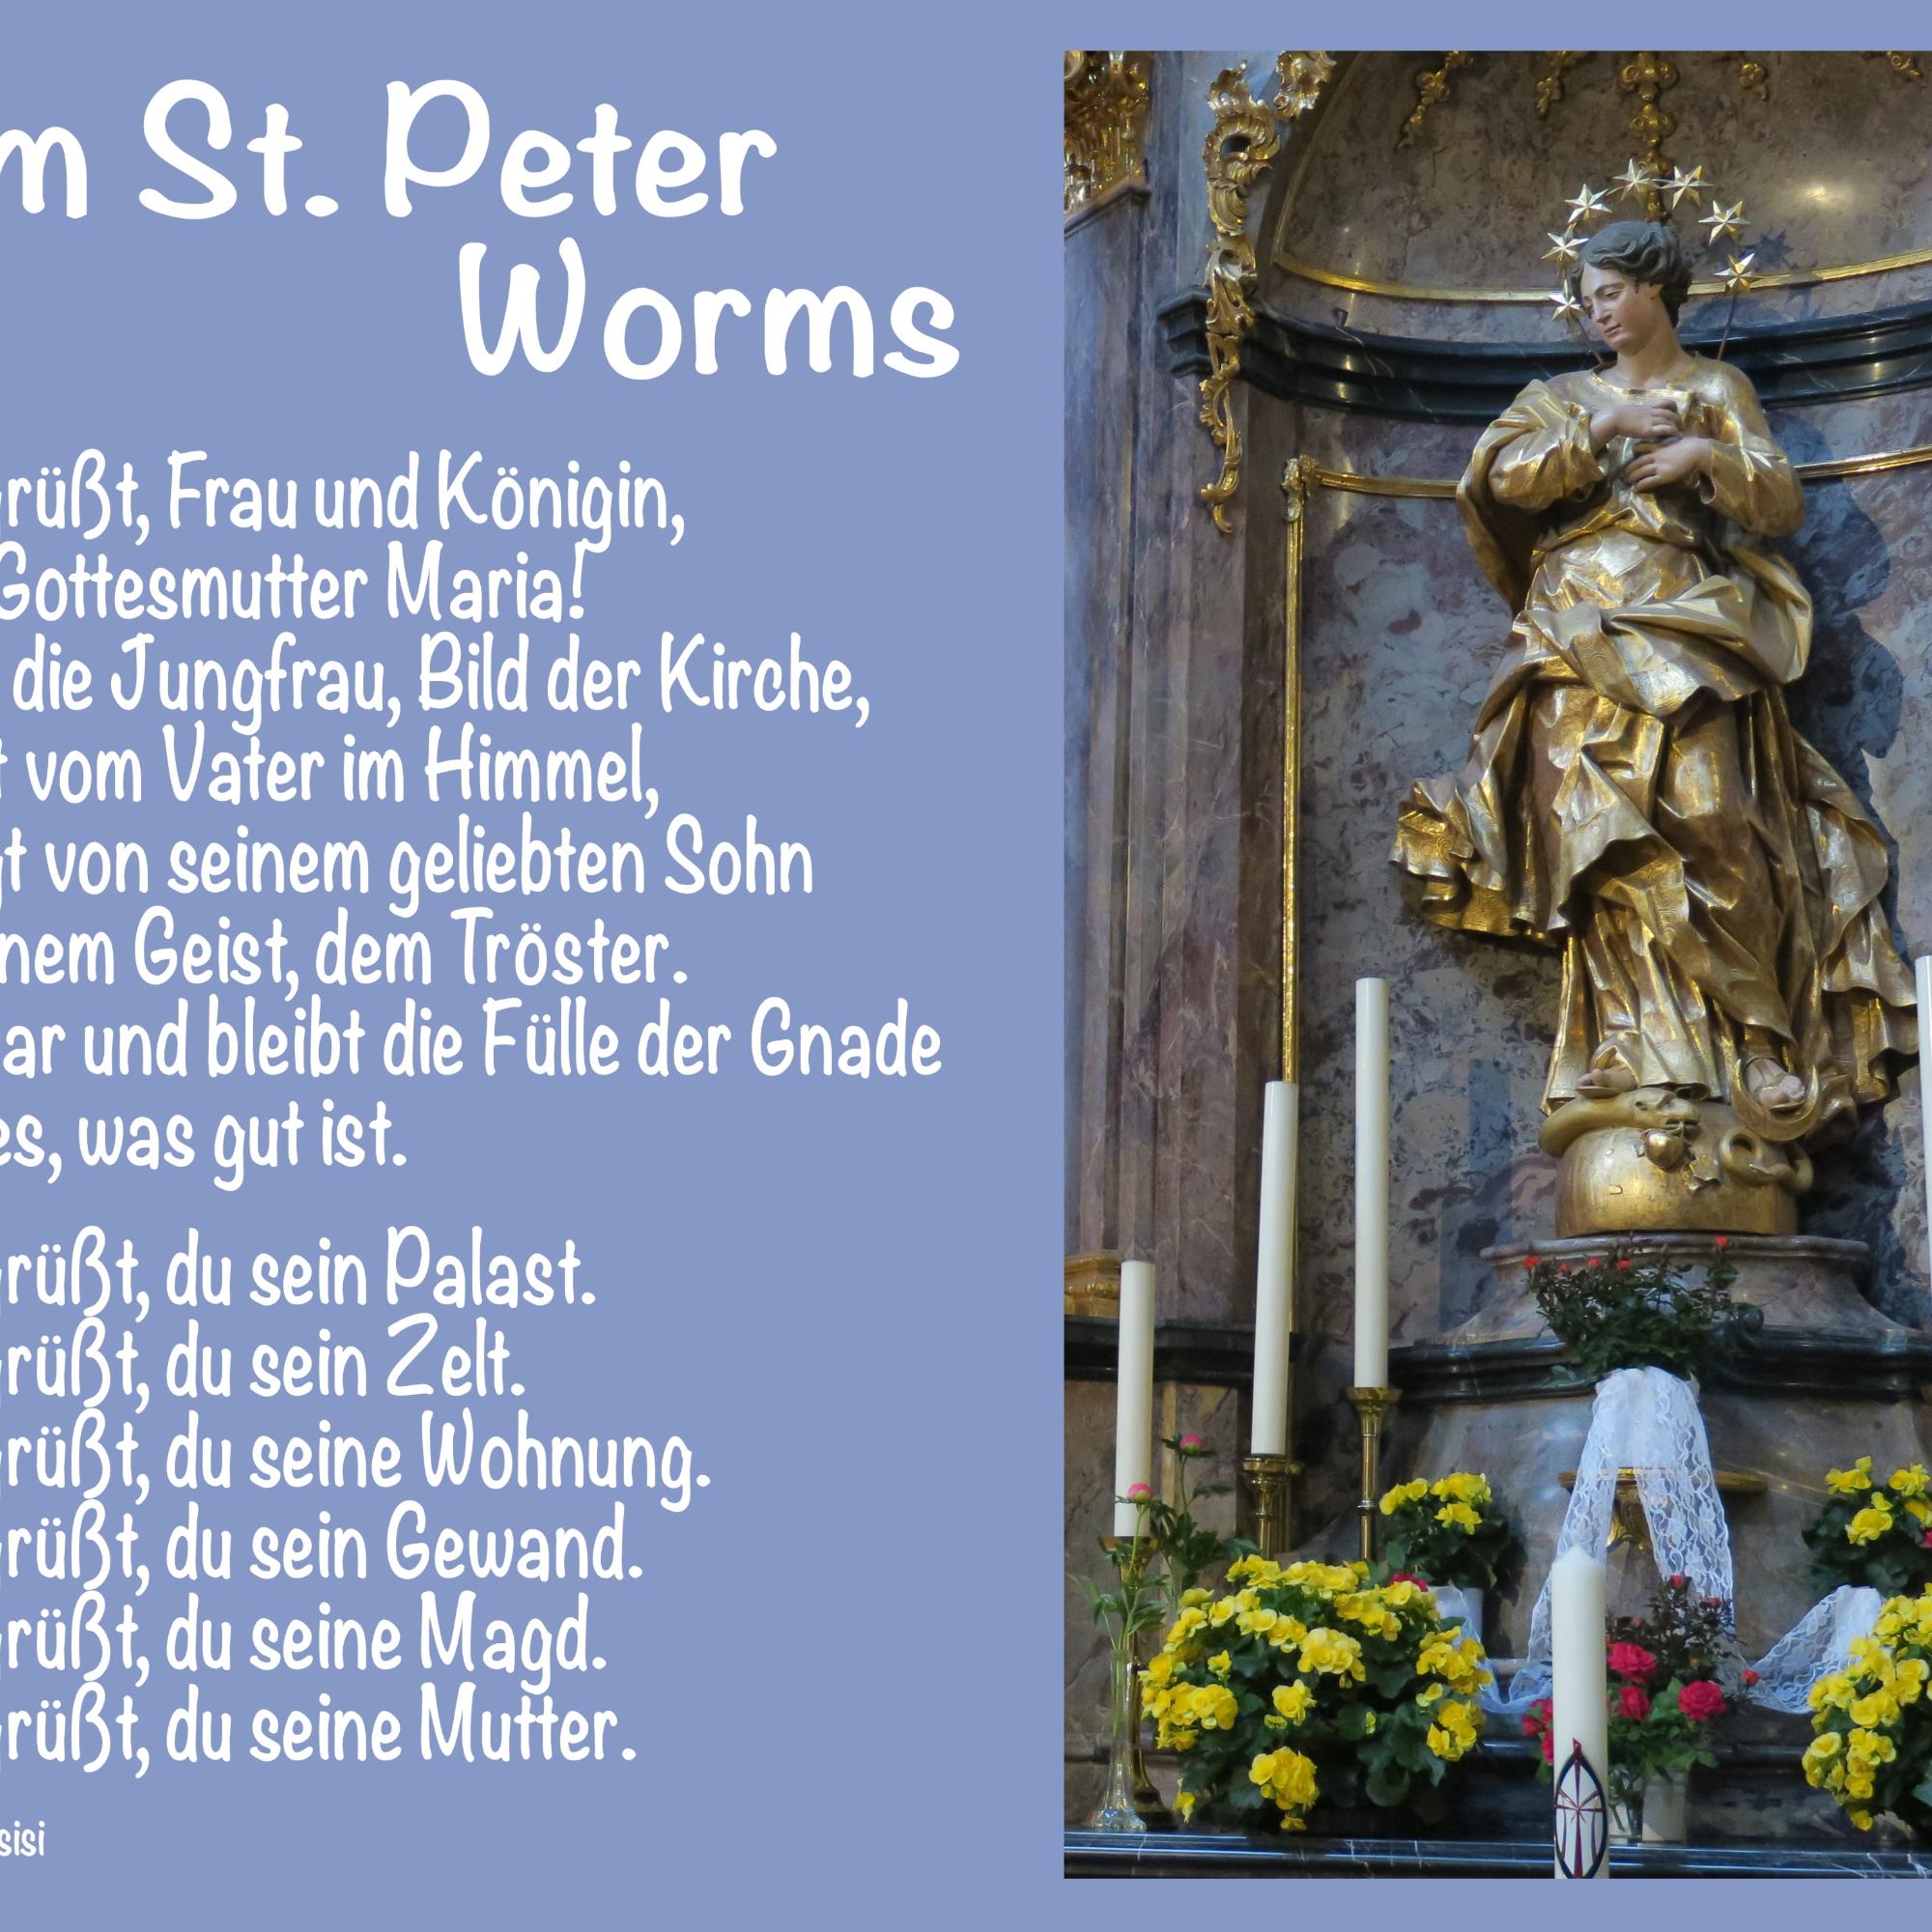 Dom St. Peter Worms